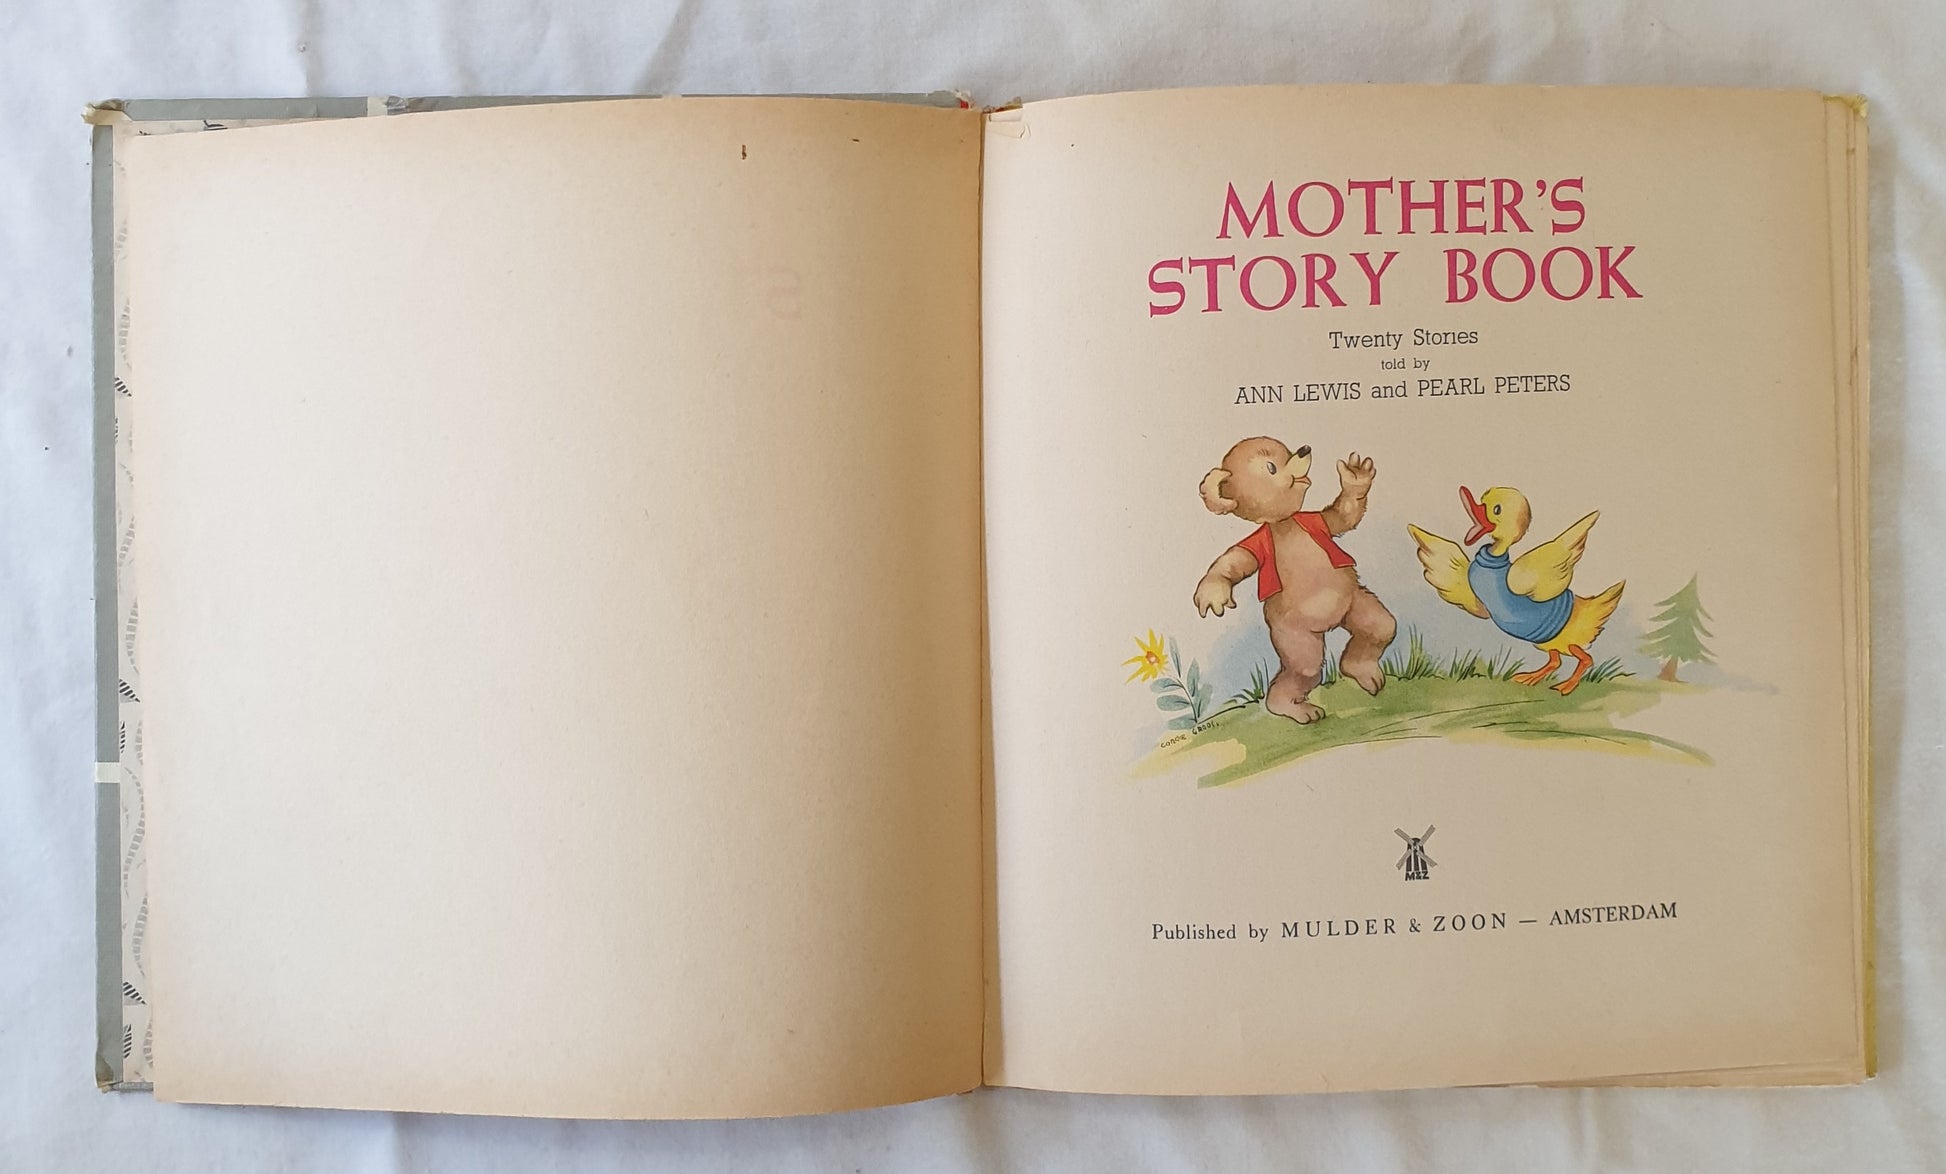 Mother’s Story Book Twenty Stories Told by Ann Lewis and Pearl Peters